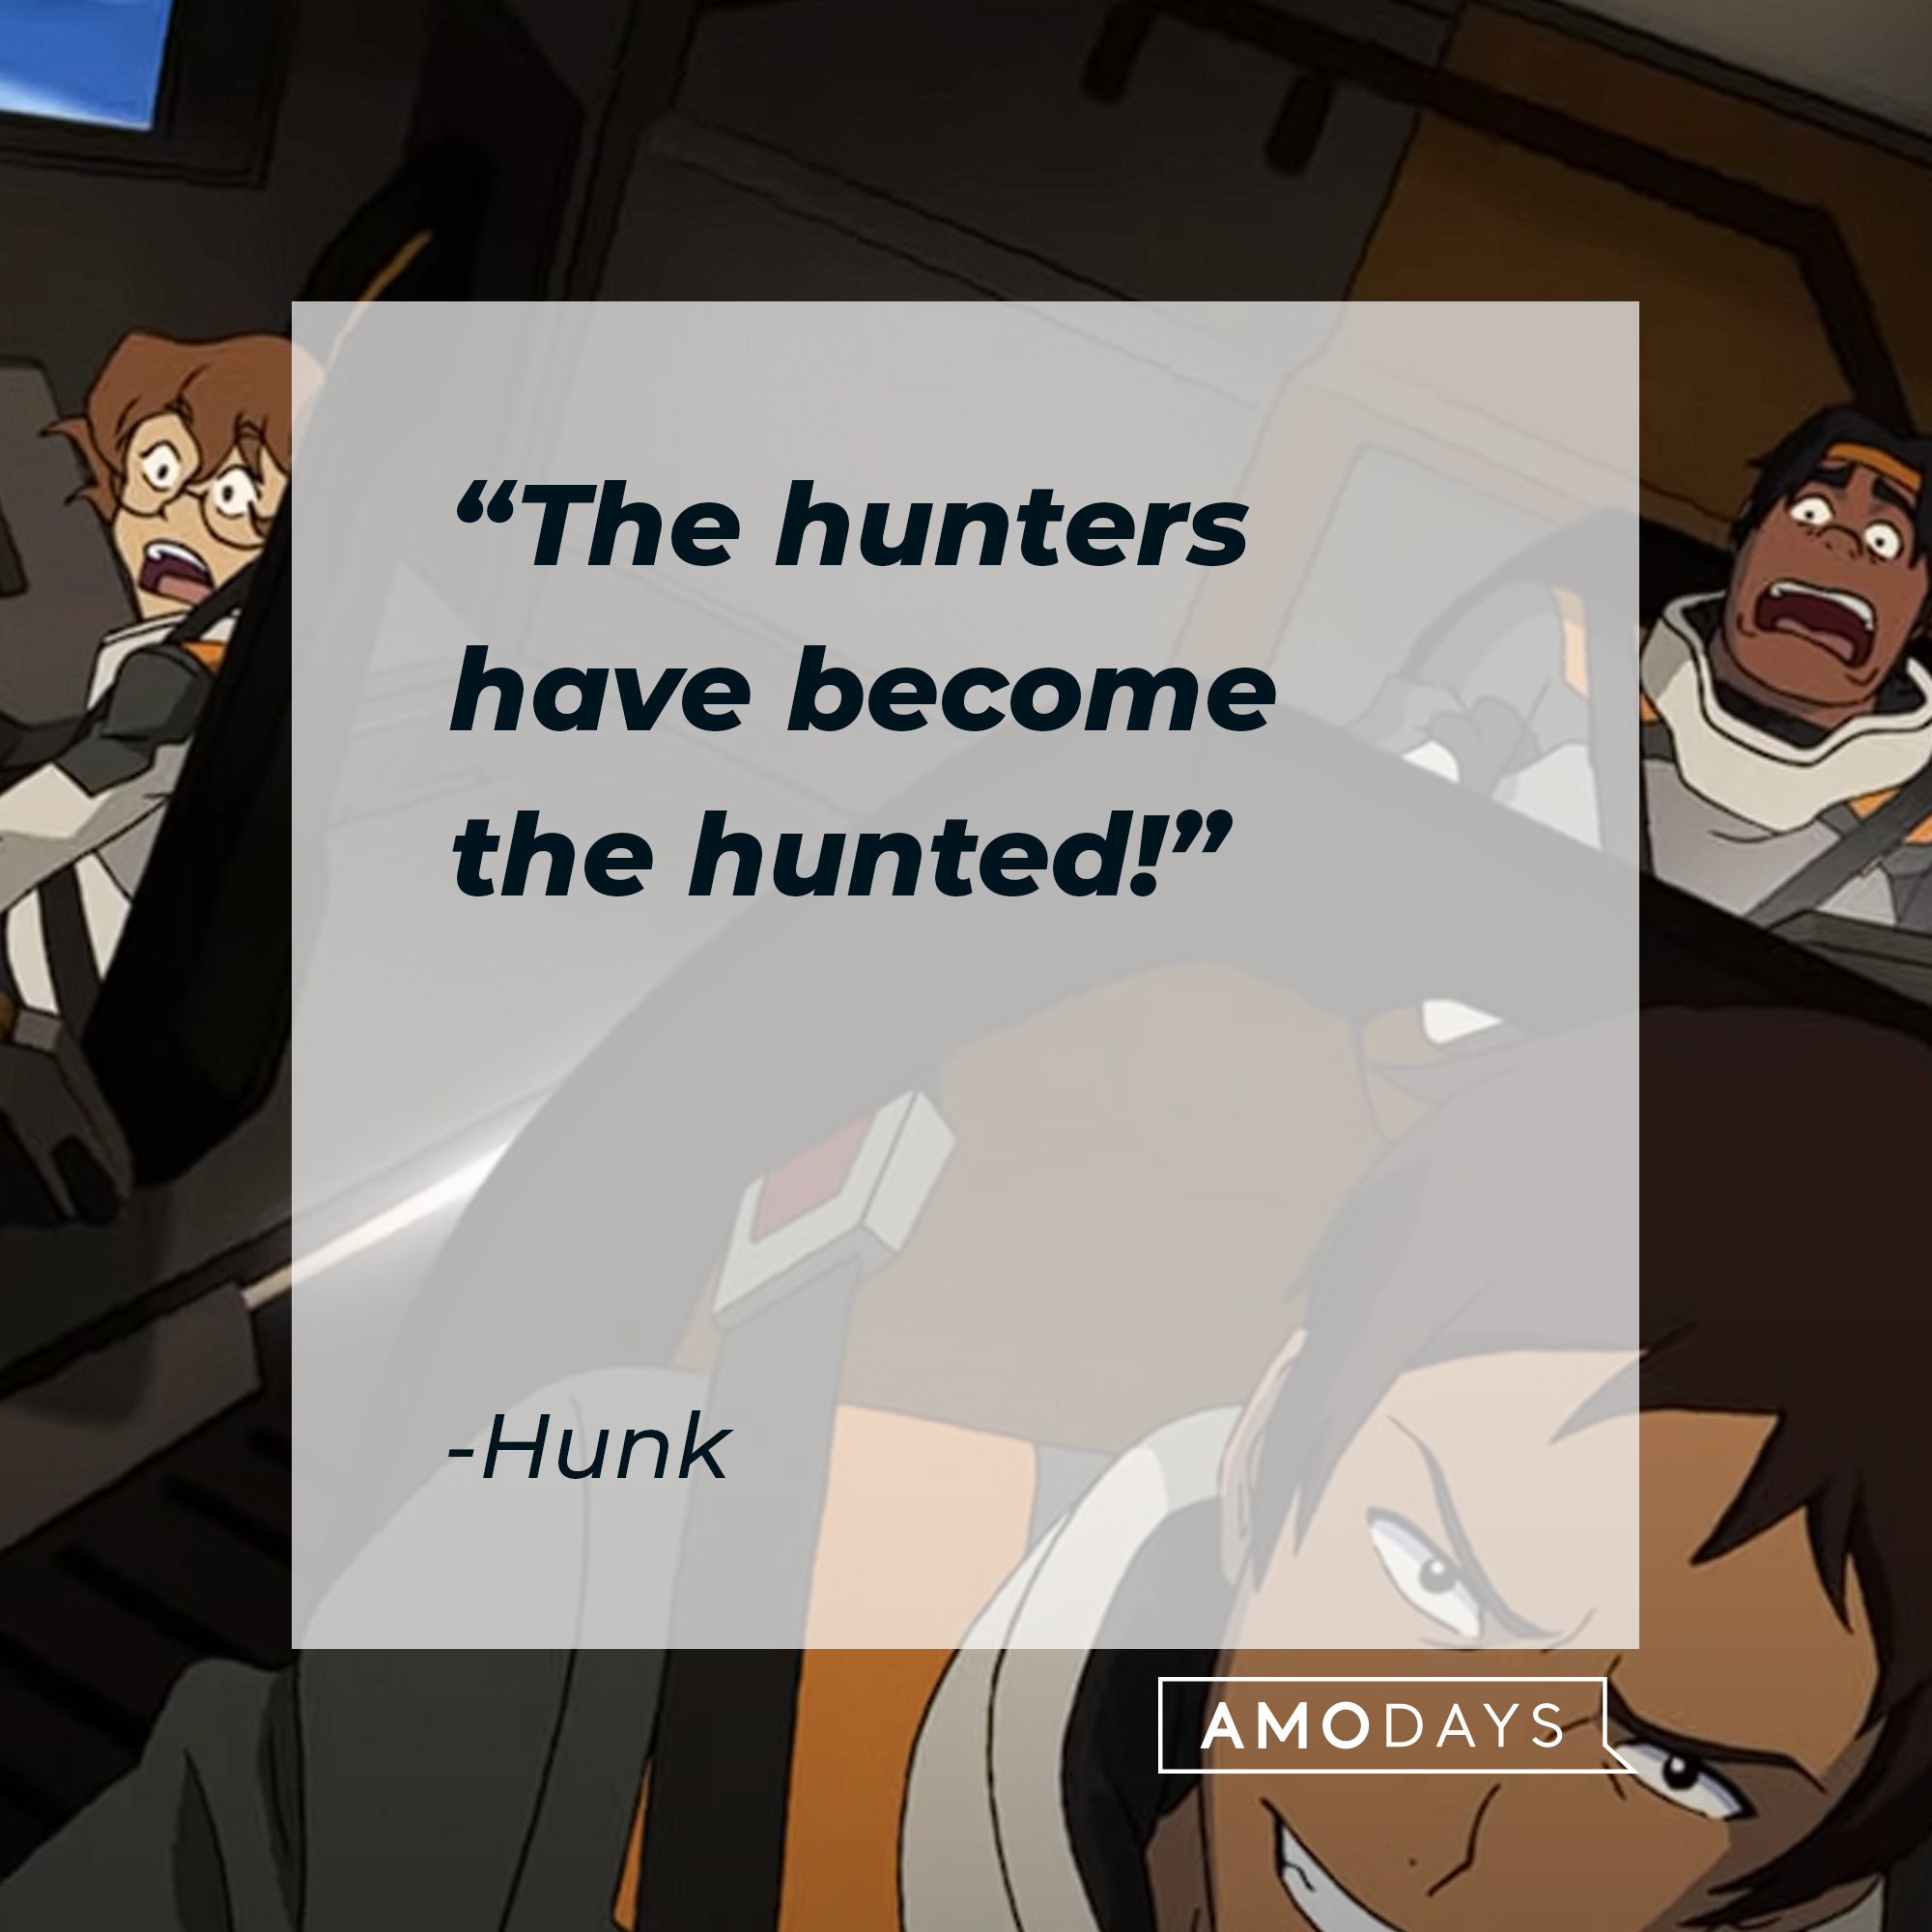 Hunk's quote: "The hunters have become the hunted!" | Source: youtube.com/netflixafterschool